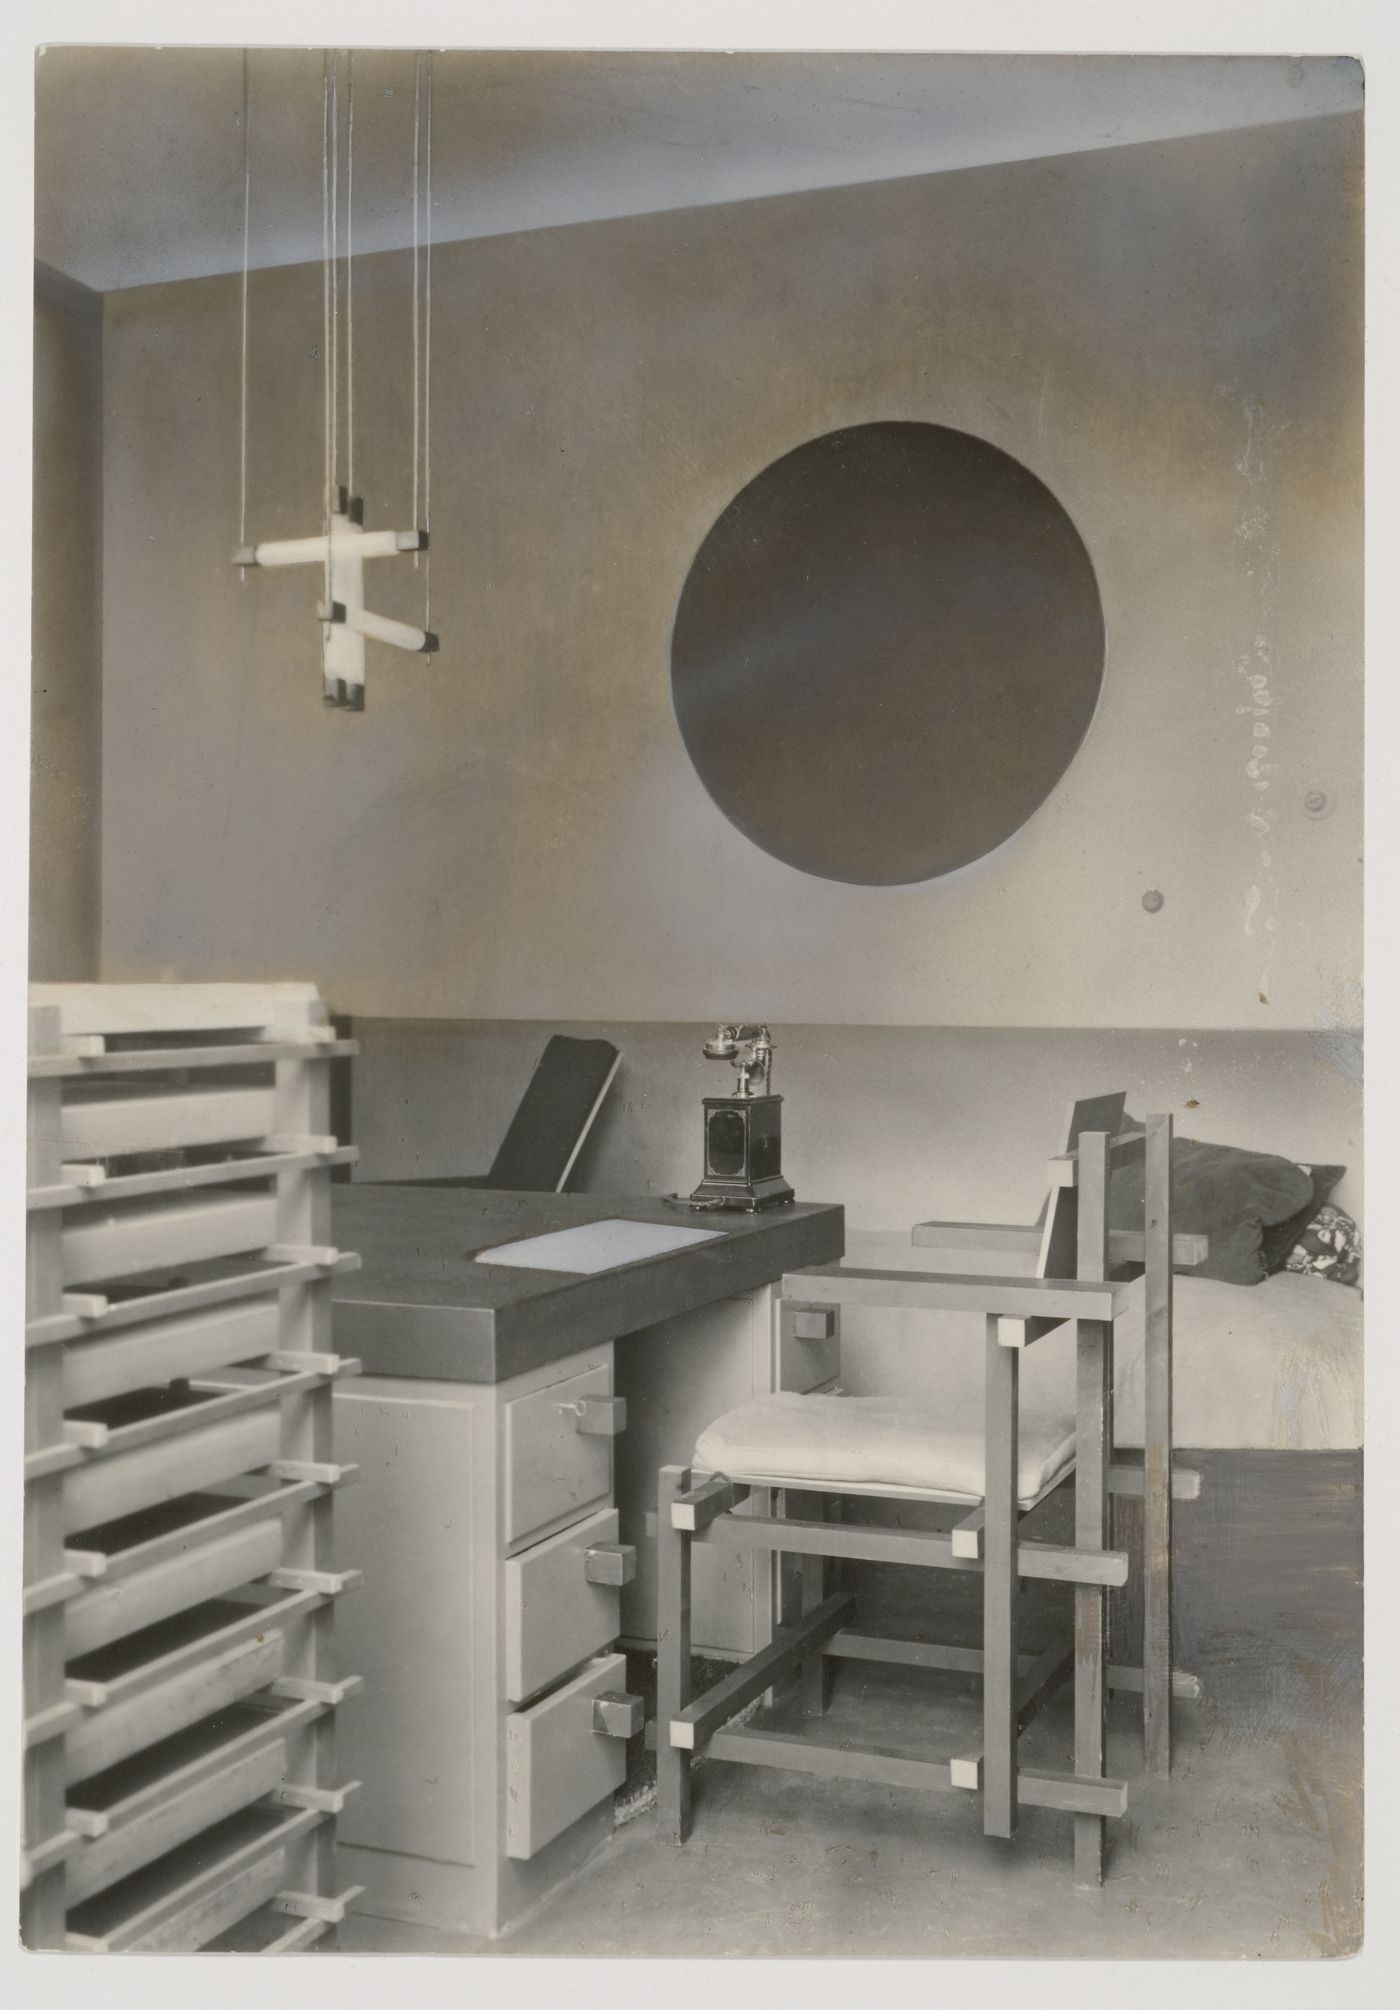 Interior view of Dr. A.M. Hartog's medical office, Maarsen, Netherlands